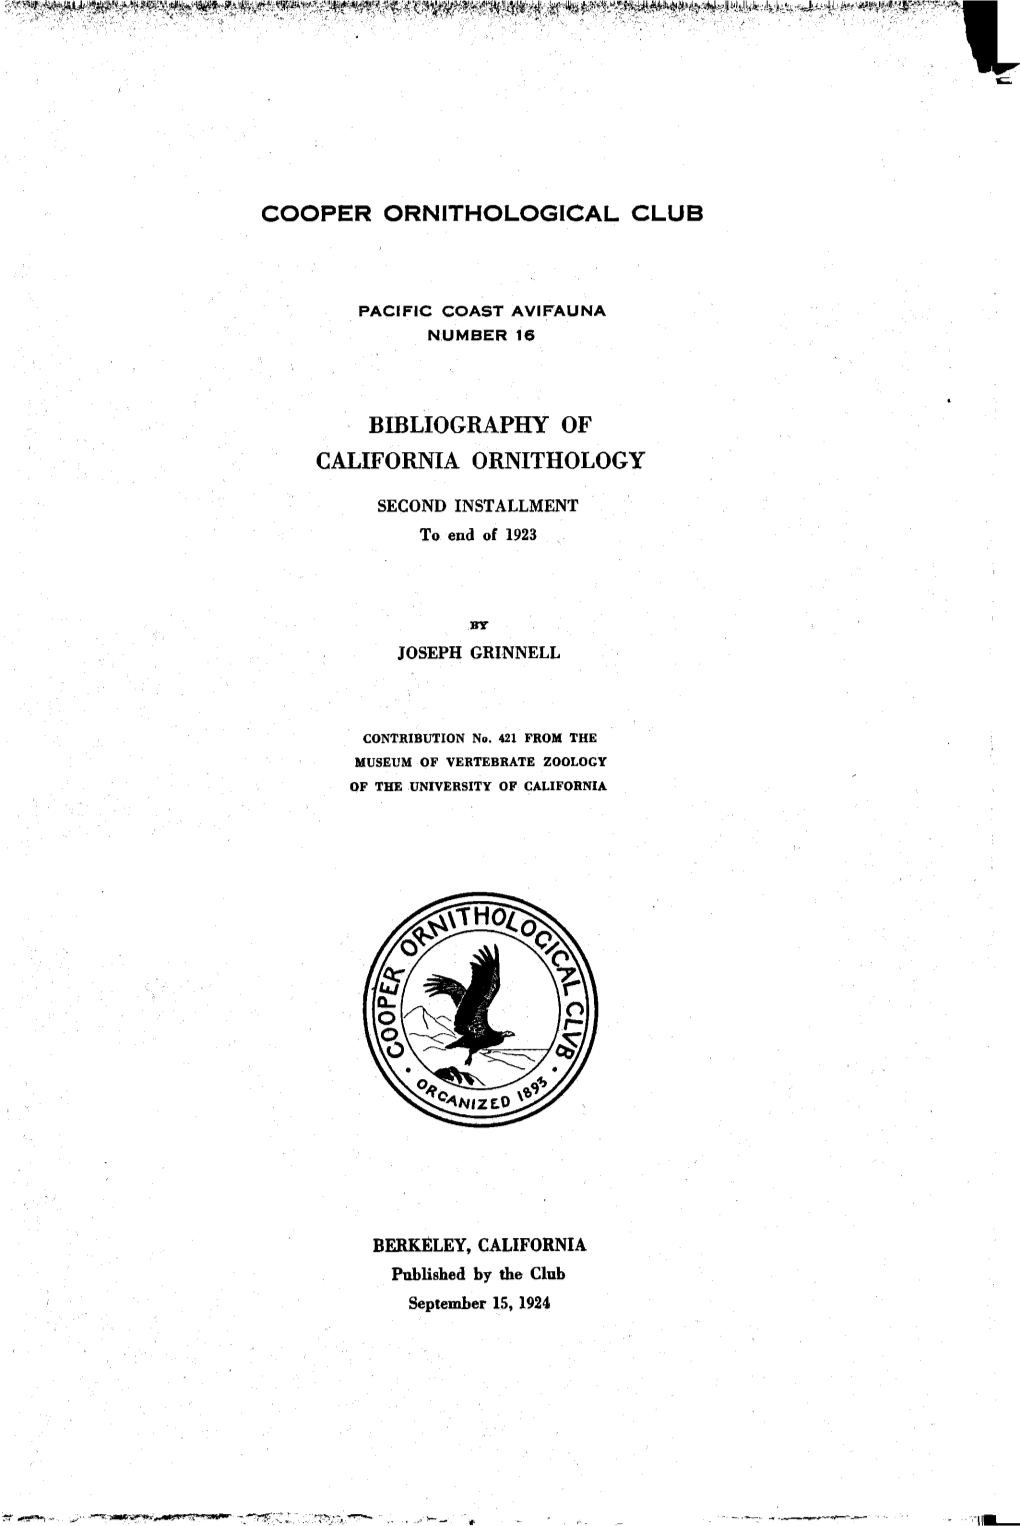 Bibliography of California Ornithology Second Installment to End of 1923